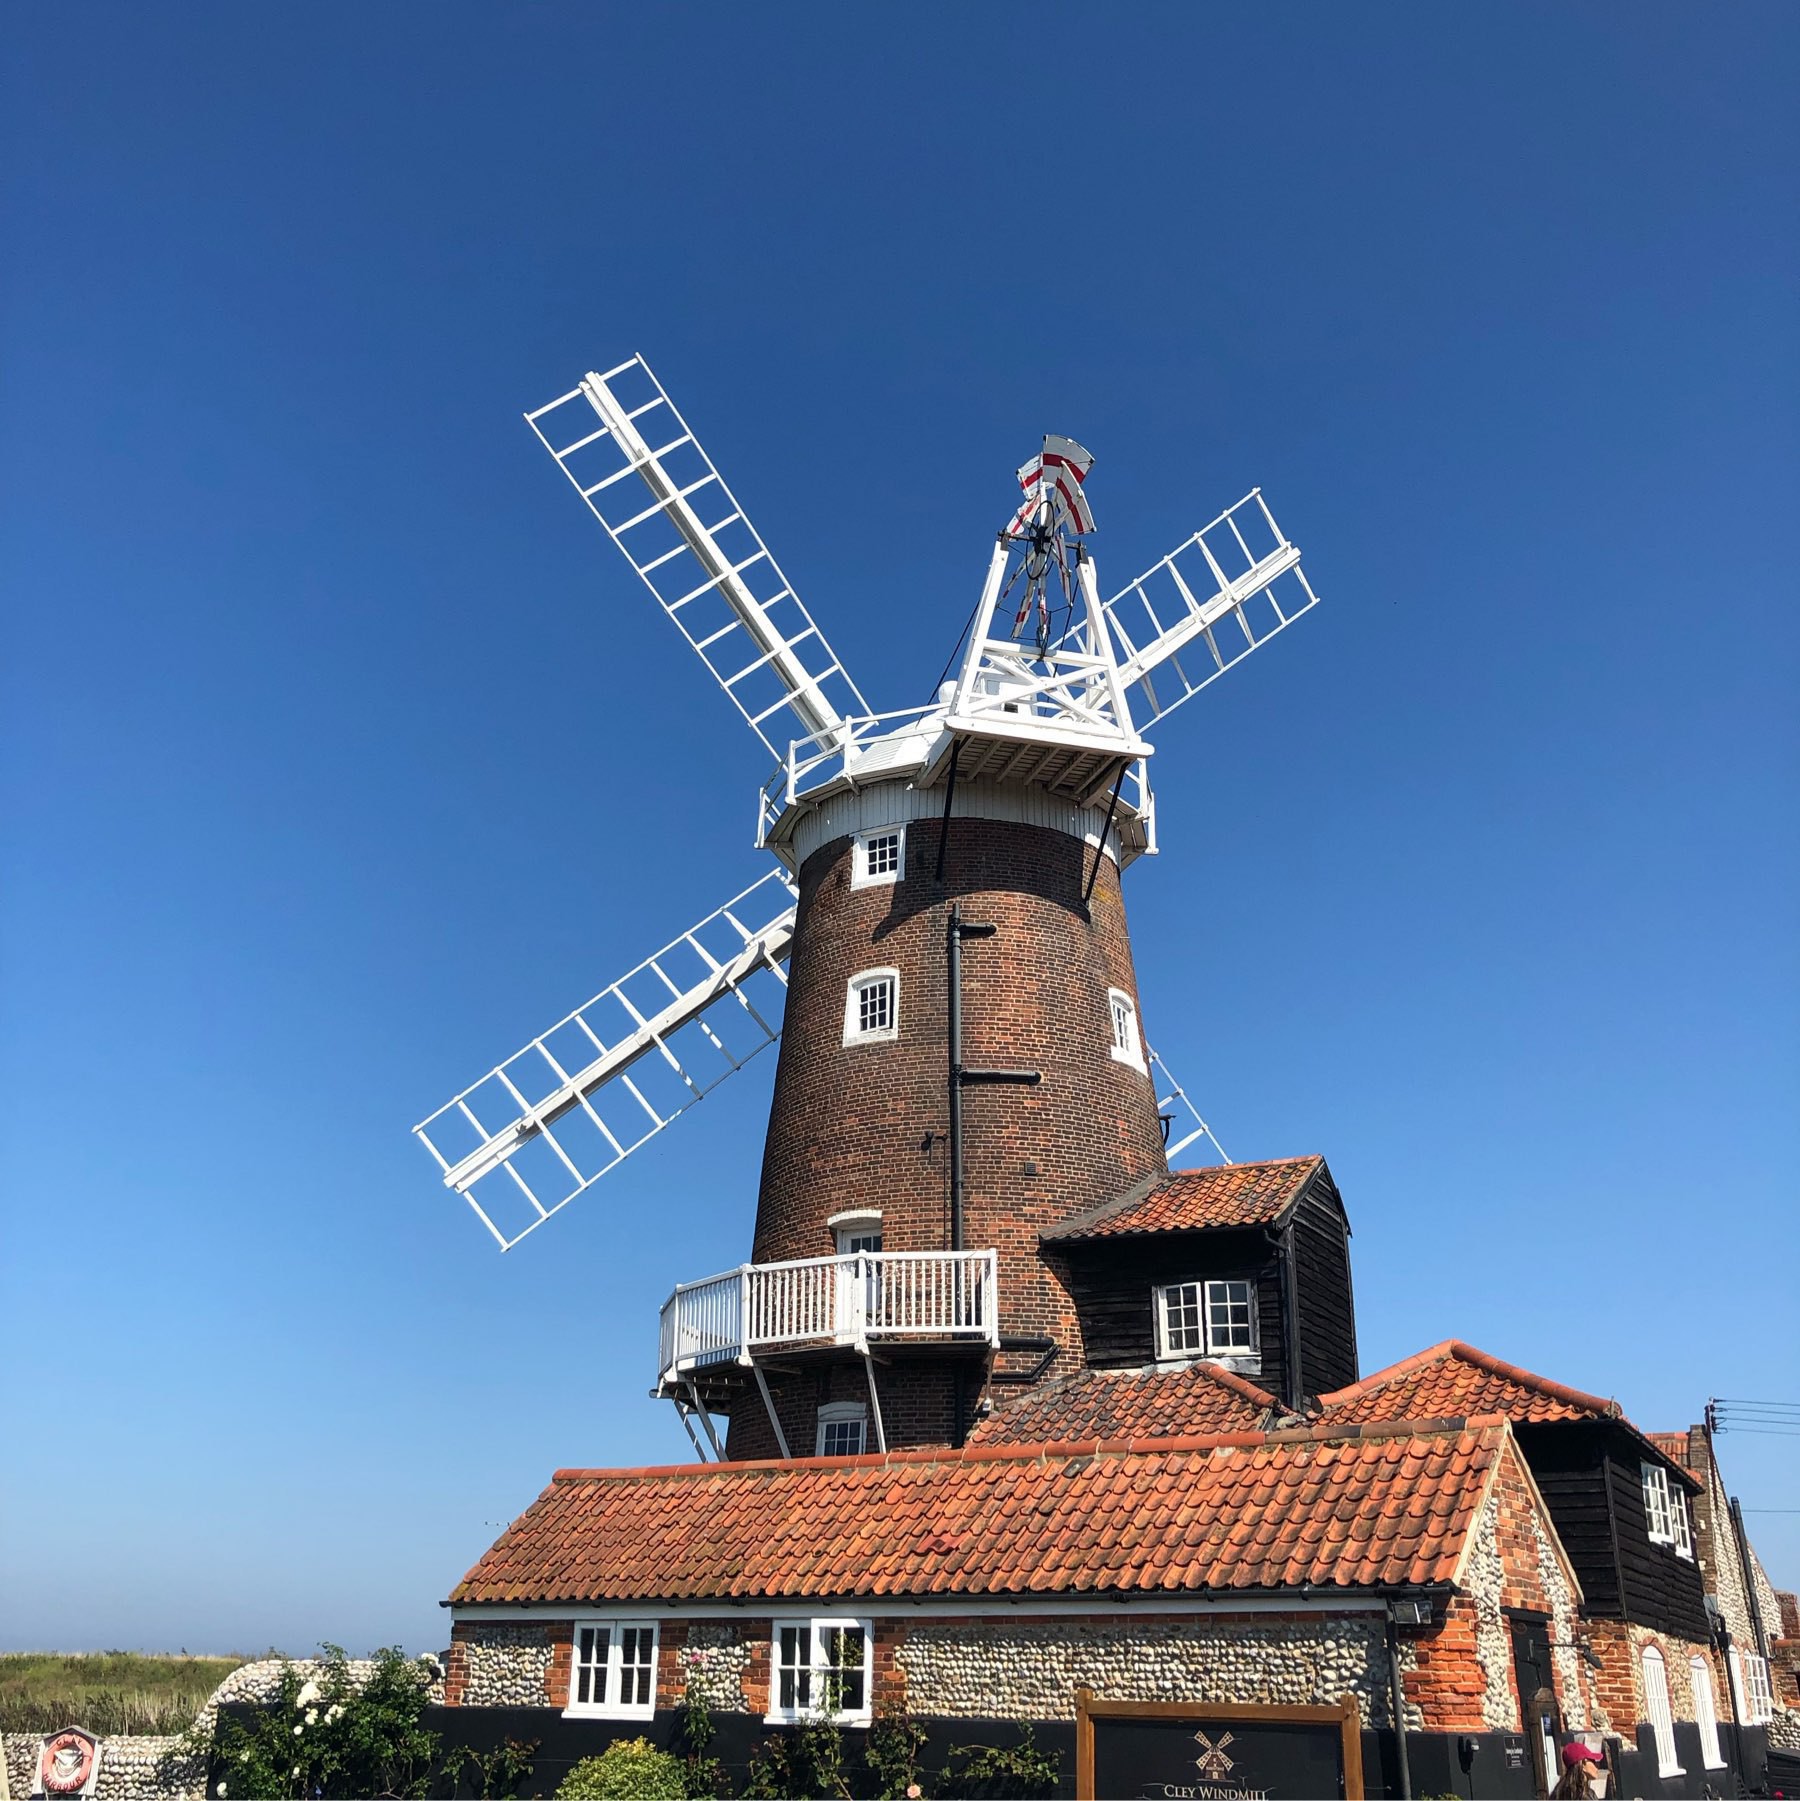 Picture of the back of a Windmill in Cley.